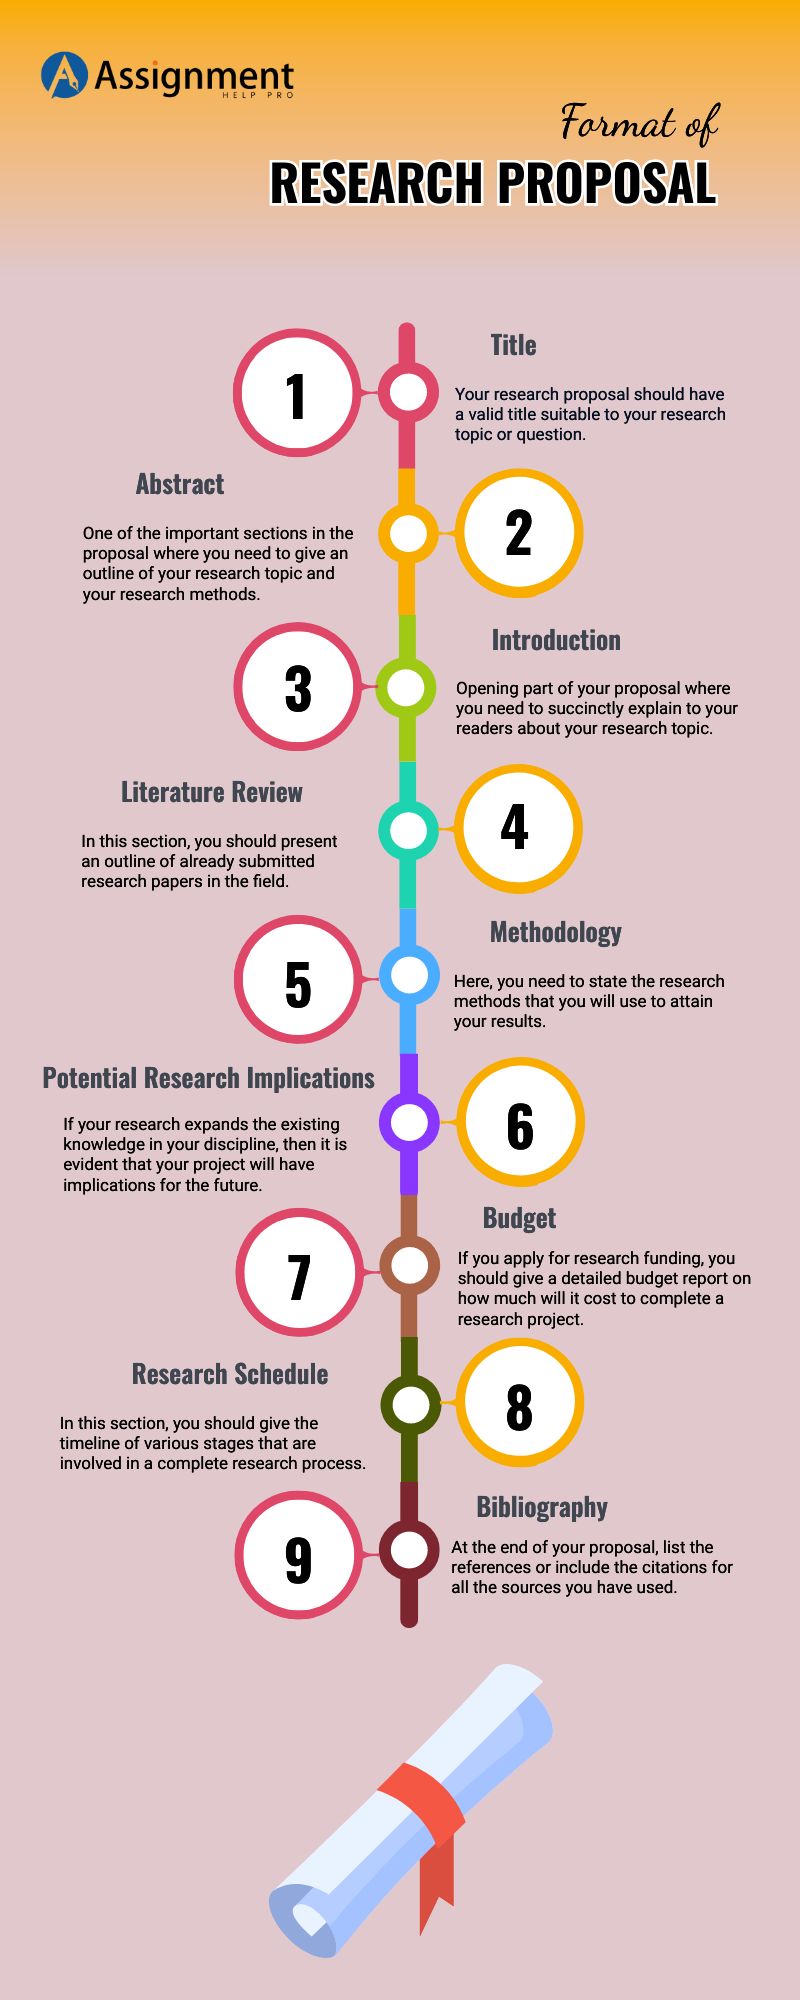 steps involved in standard research proposal